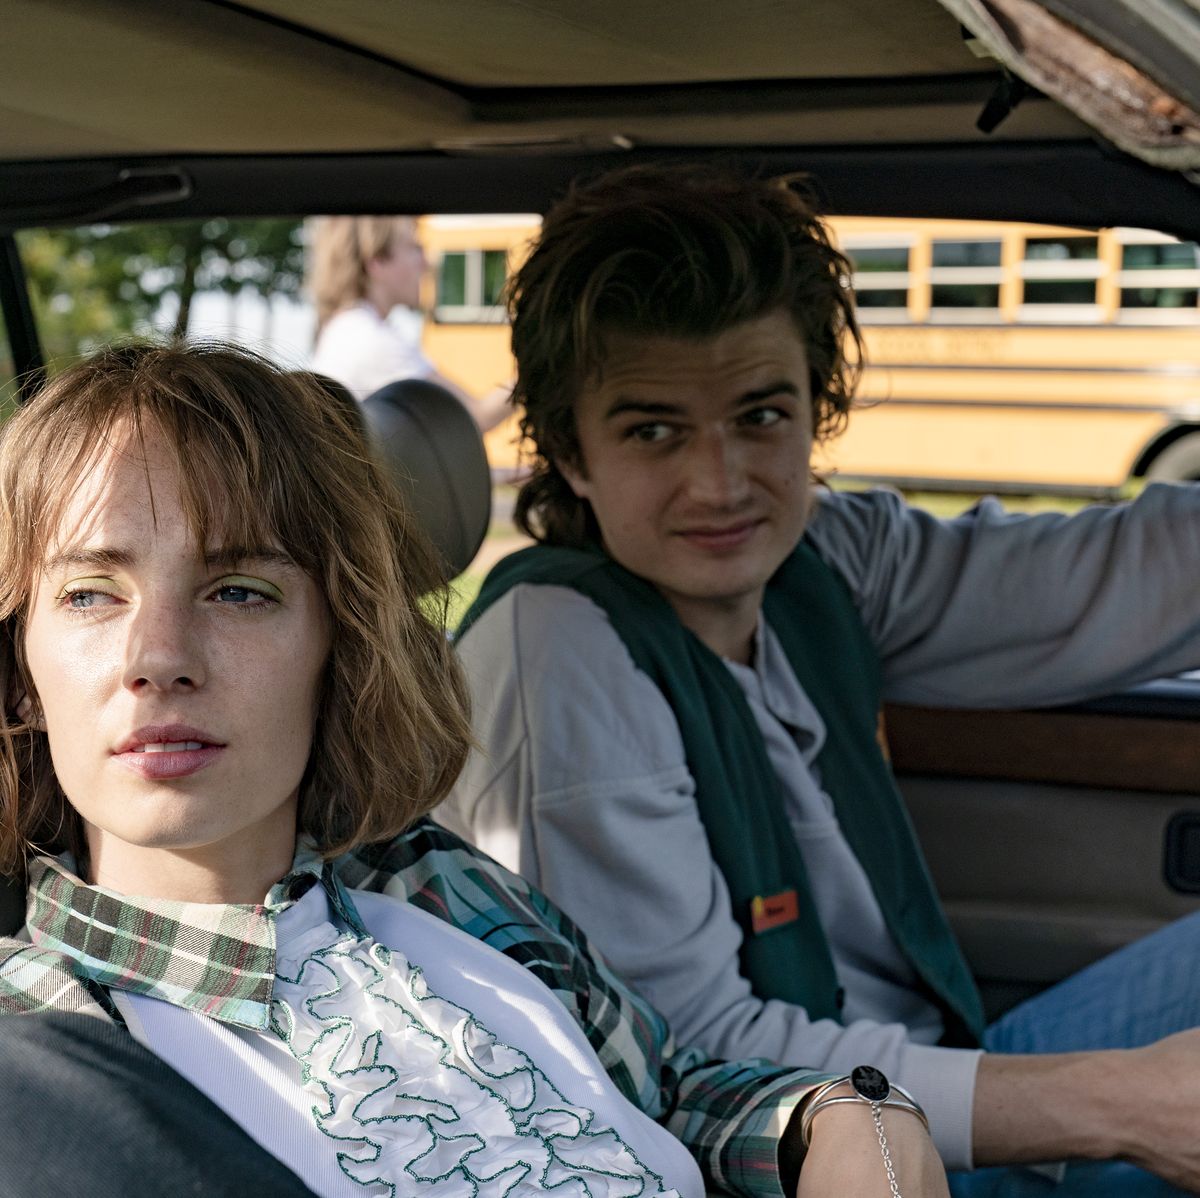 Stranger Things season 5 release date speculation, cast, & more